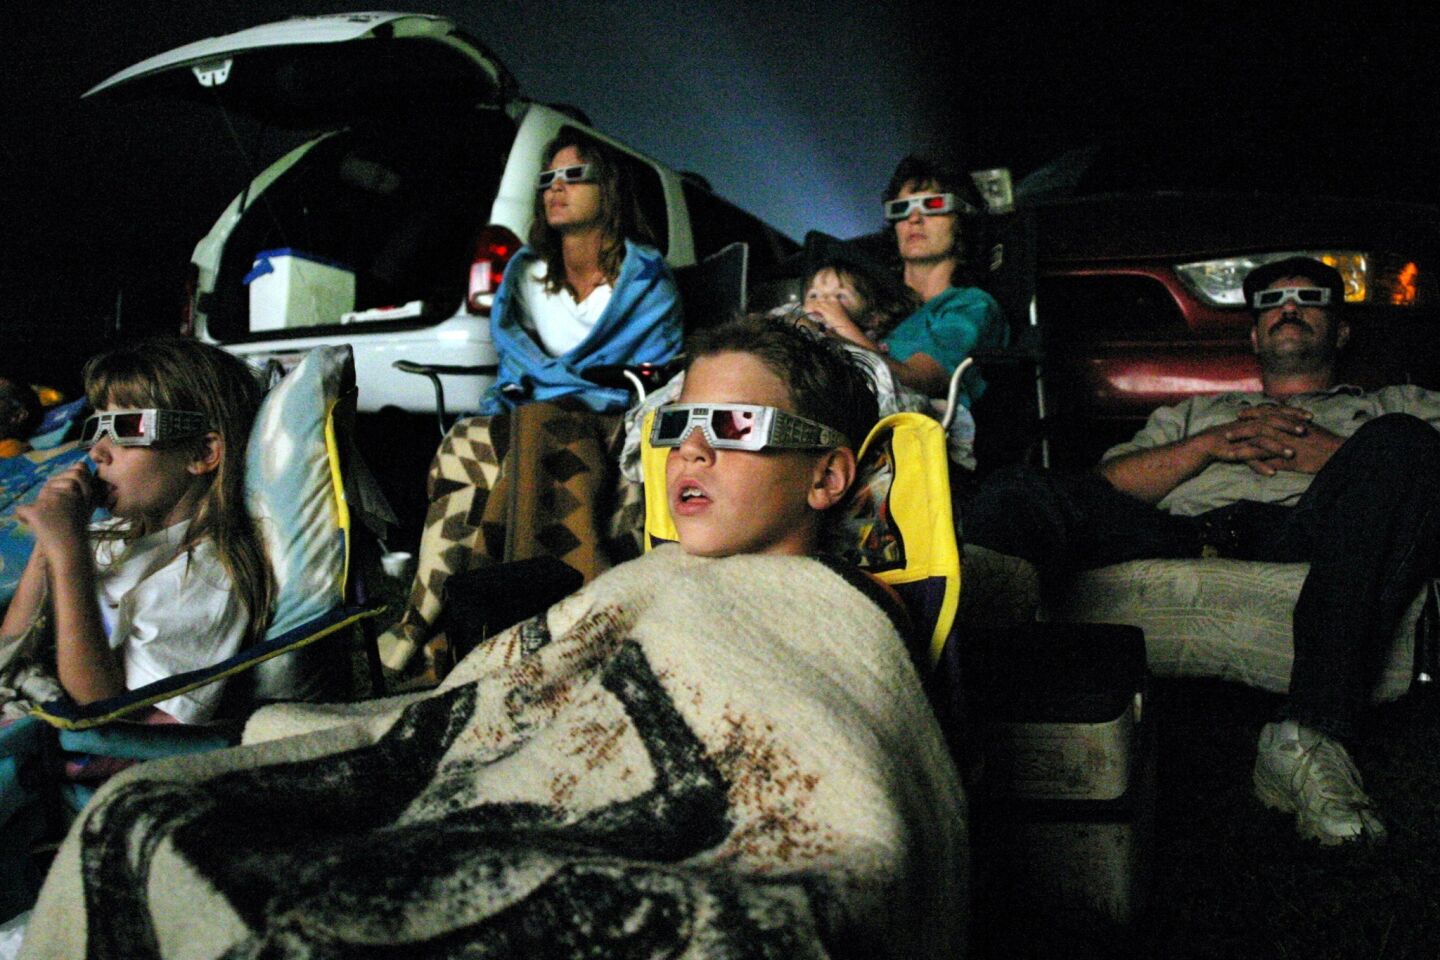 At Hull's in Lexington, Va., a family watches "Spy Kids 3-D."